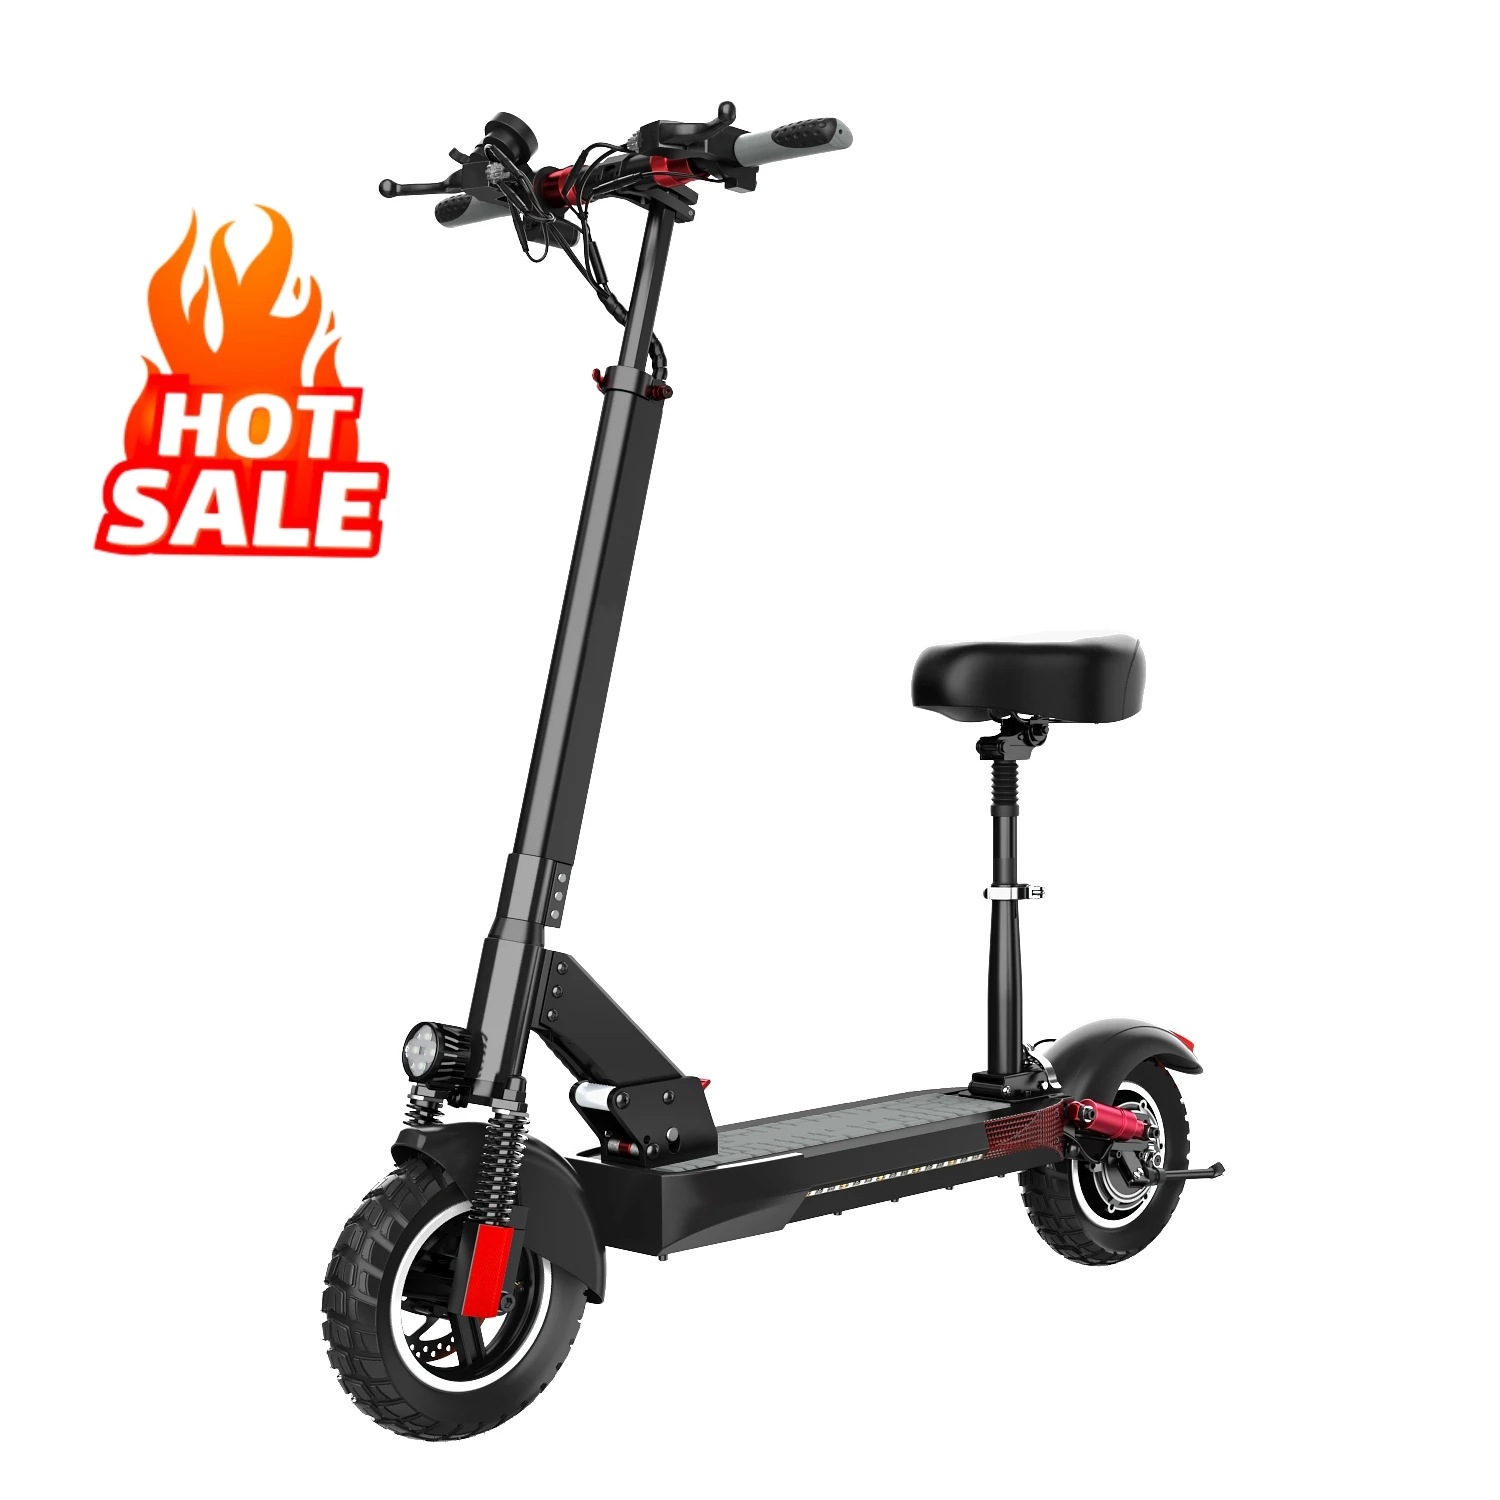 

USA hot sale Adult 800W electric scooter 10 inch off road tyre fast speed 30mph electric scooter with seat